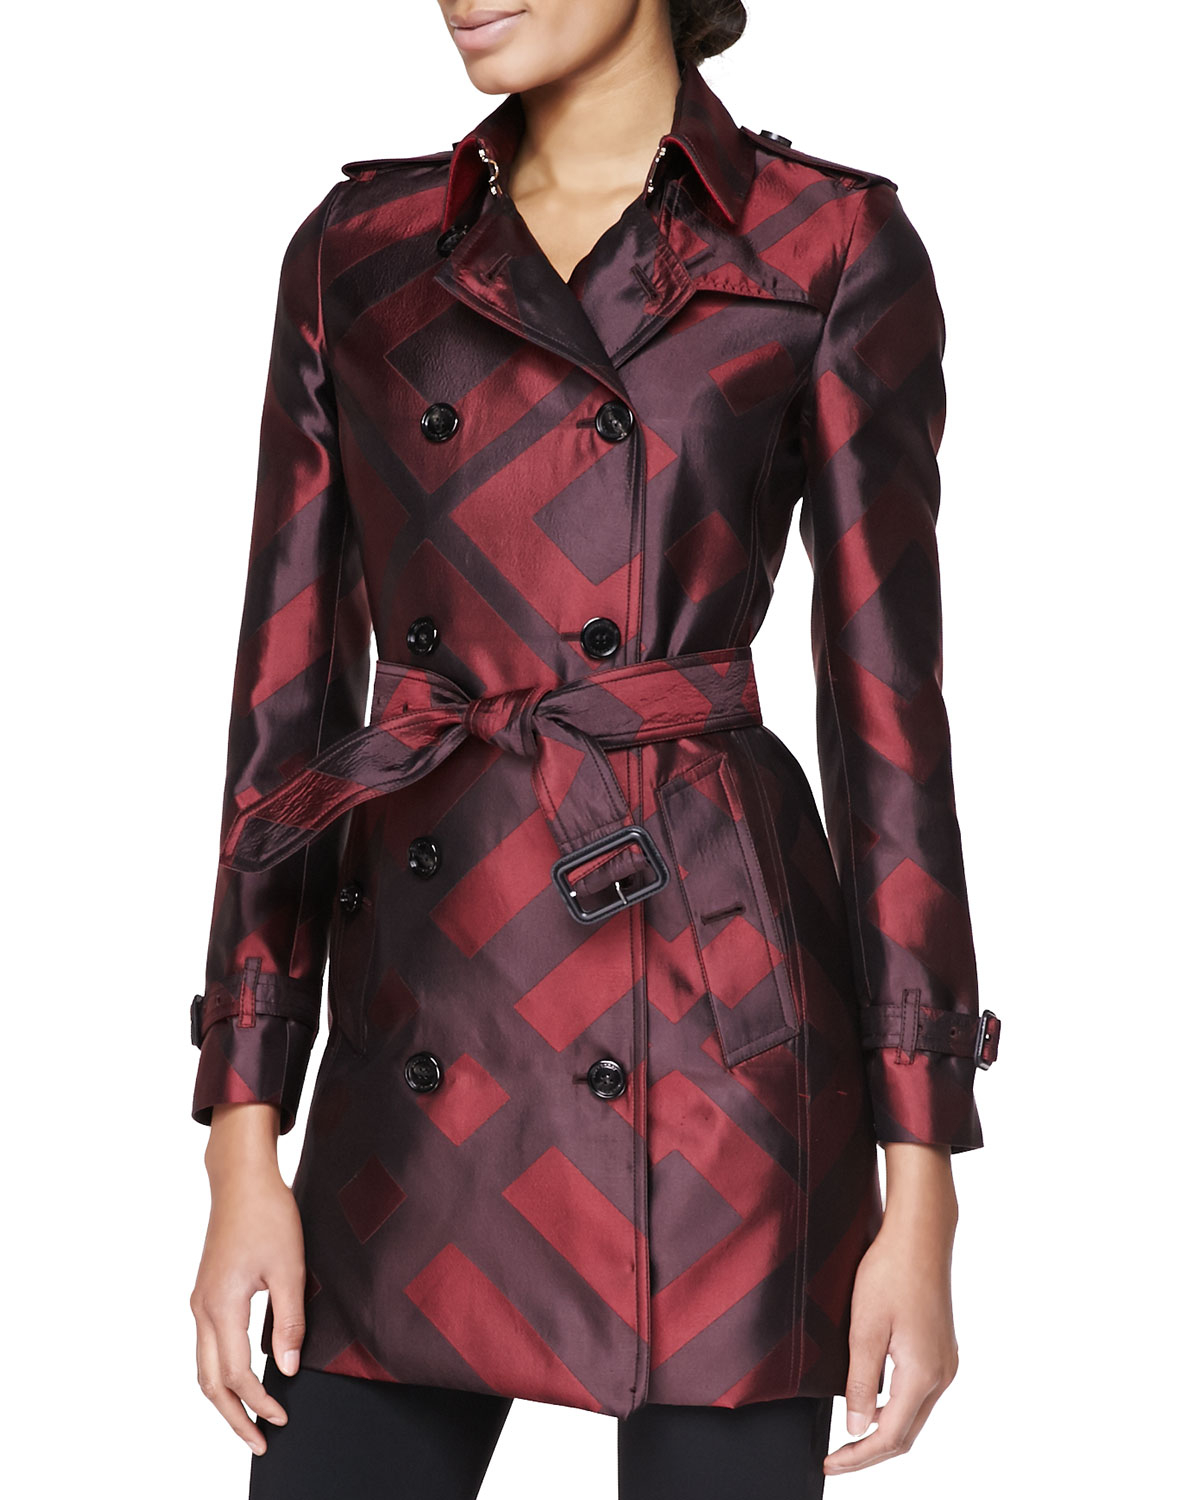 Lyst - Burberry Check Silk Trench Coat in Red